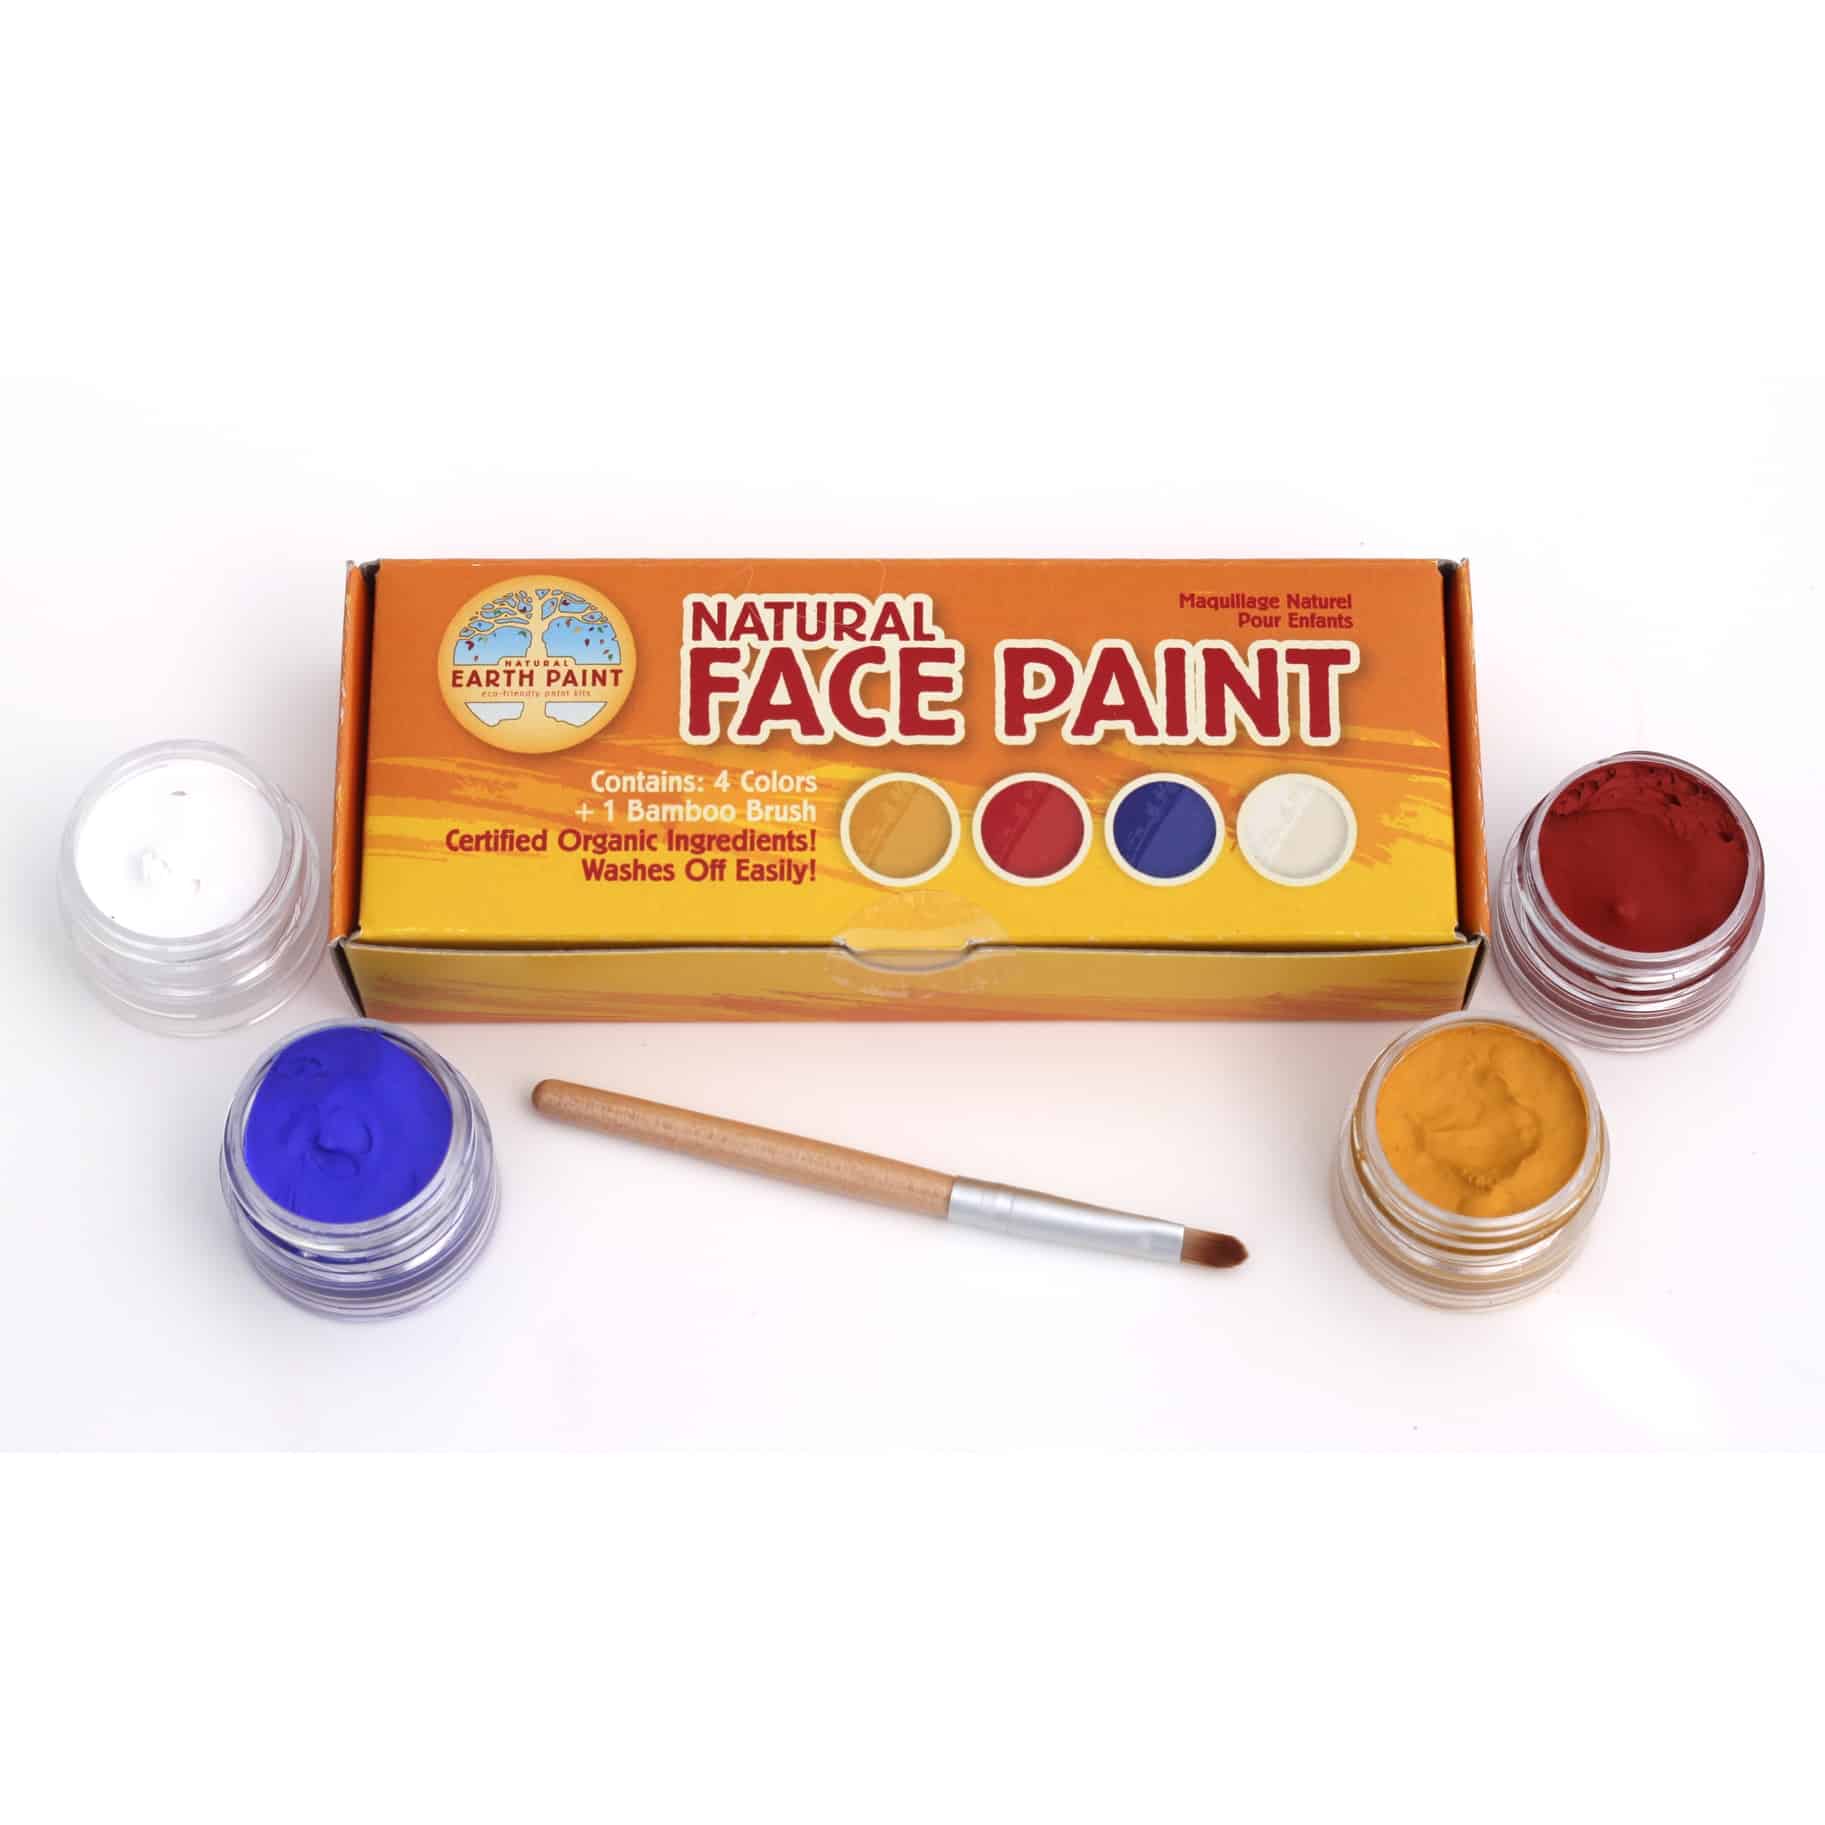 Natural Earth Paint Face Paint Mini Kit from gimme the good stuff